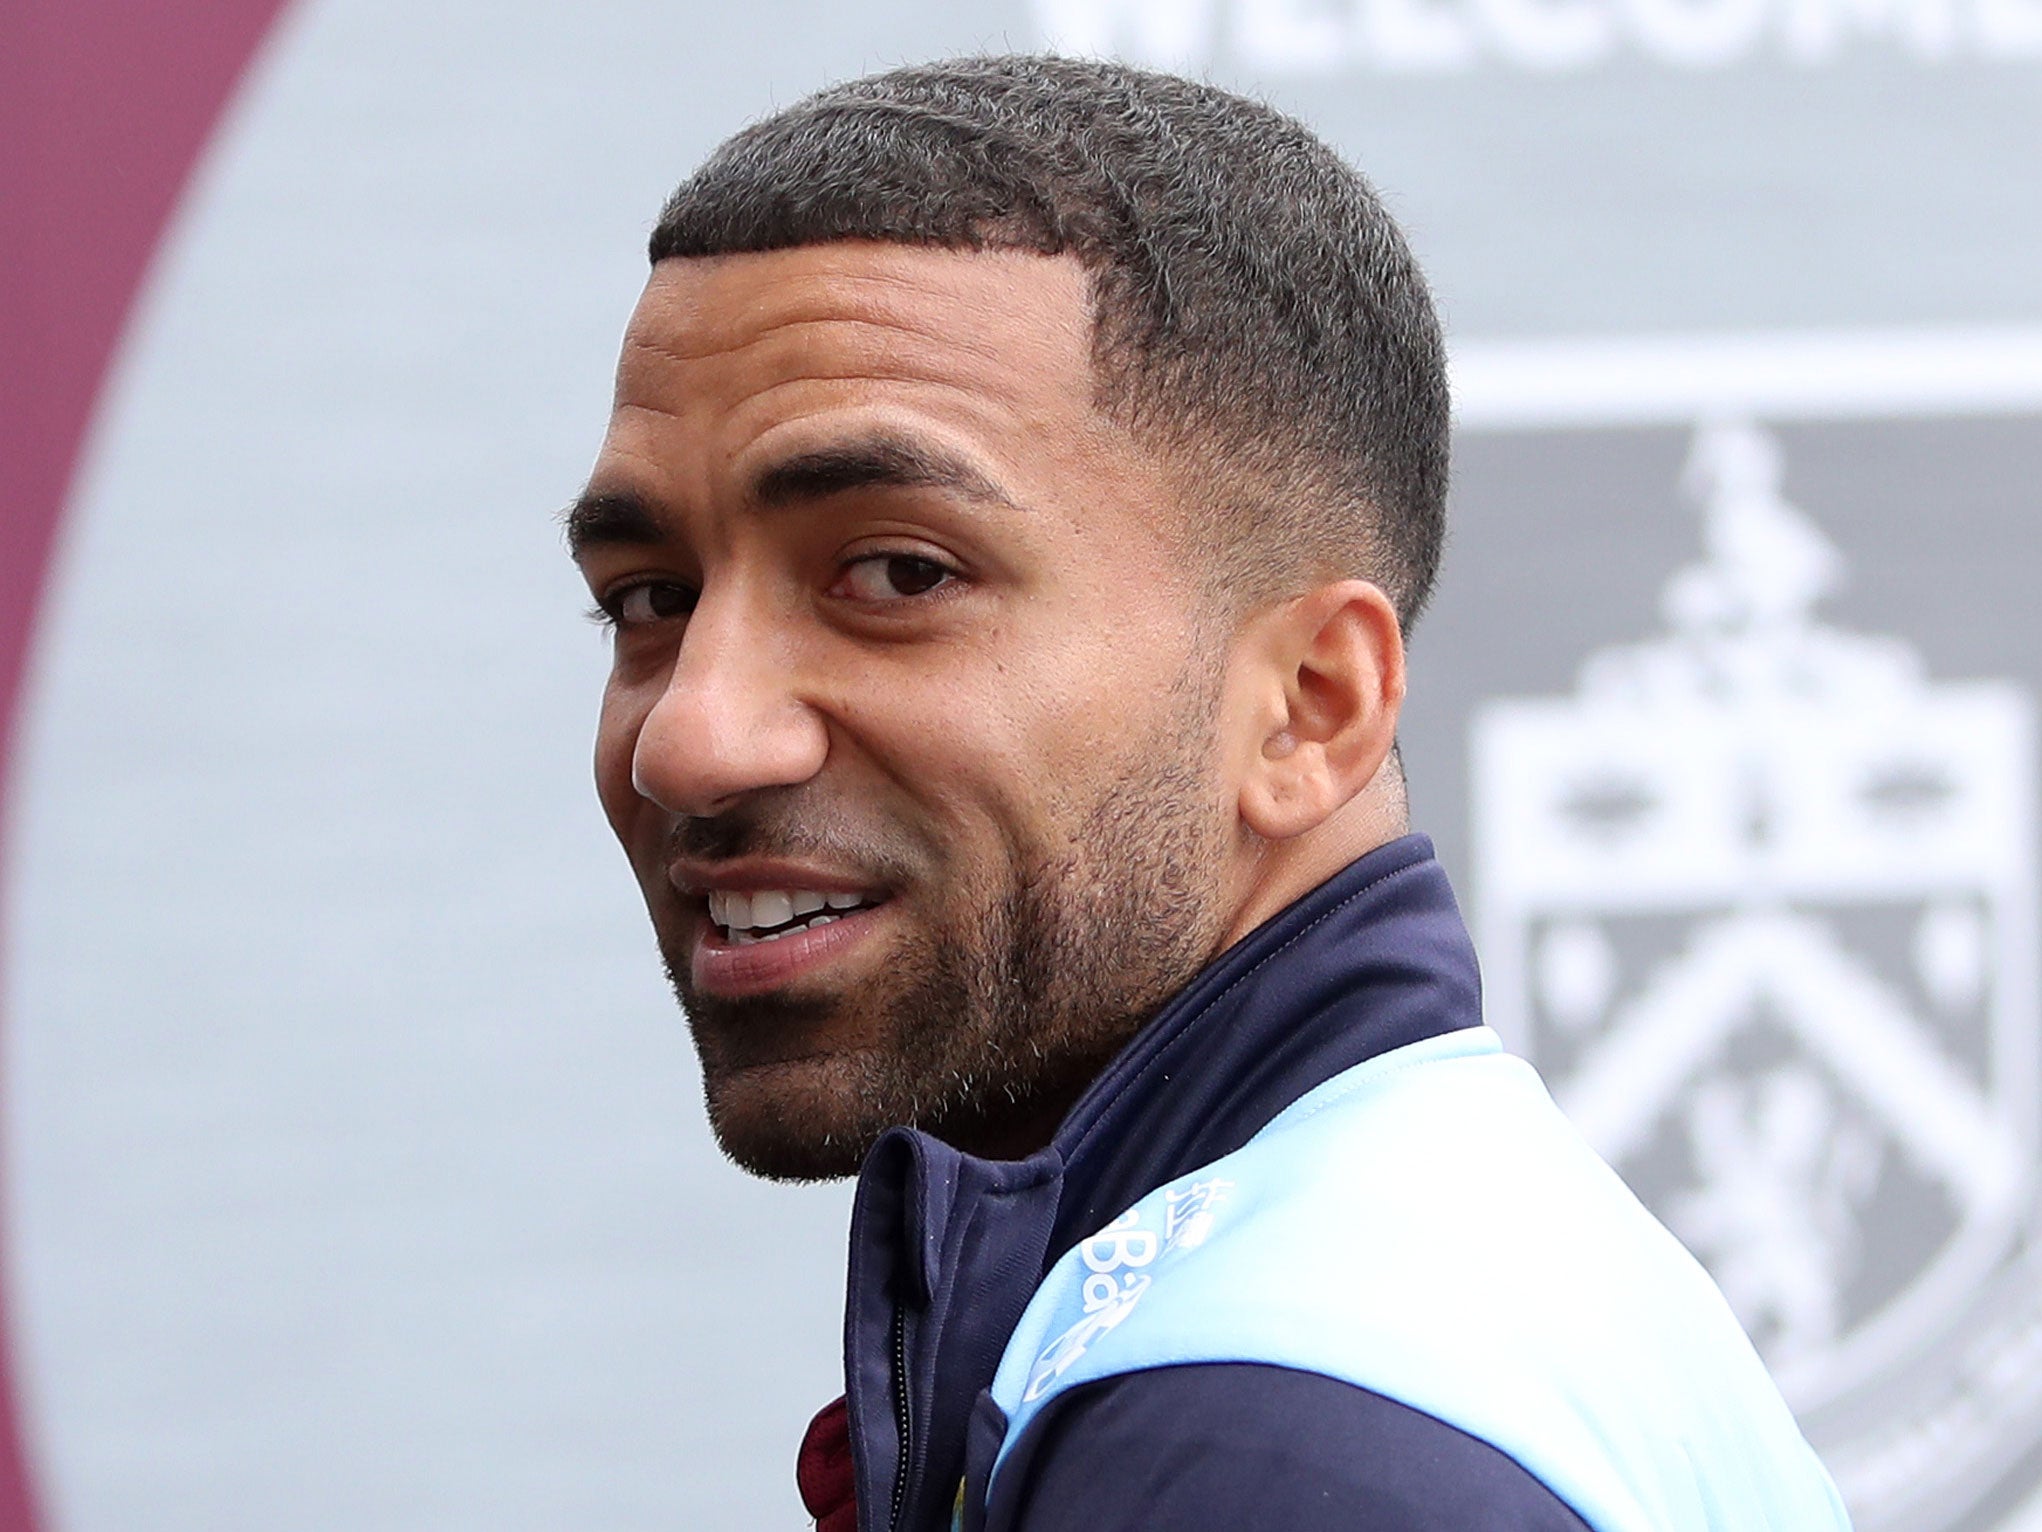 Aaron Lennon's struggles with depression taught him to ask for help if he needed it